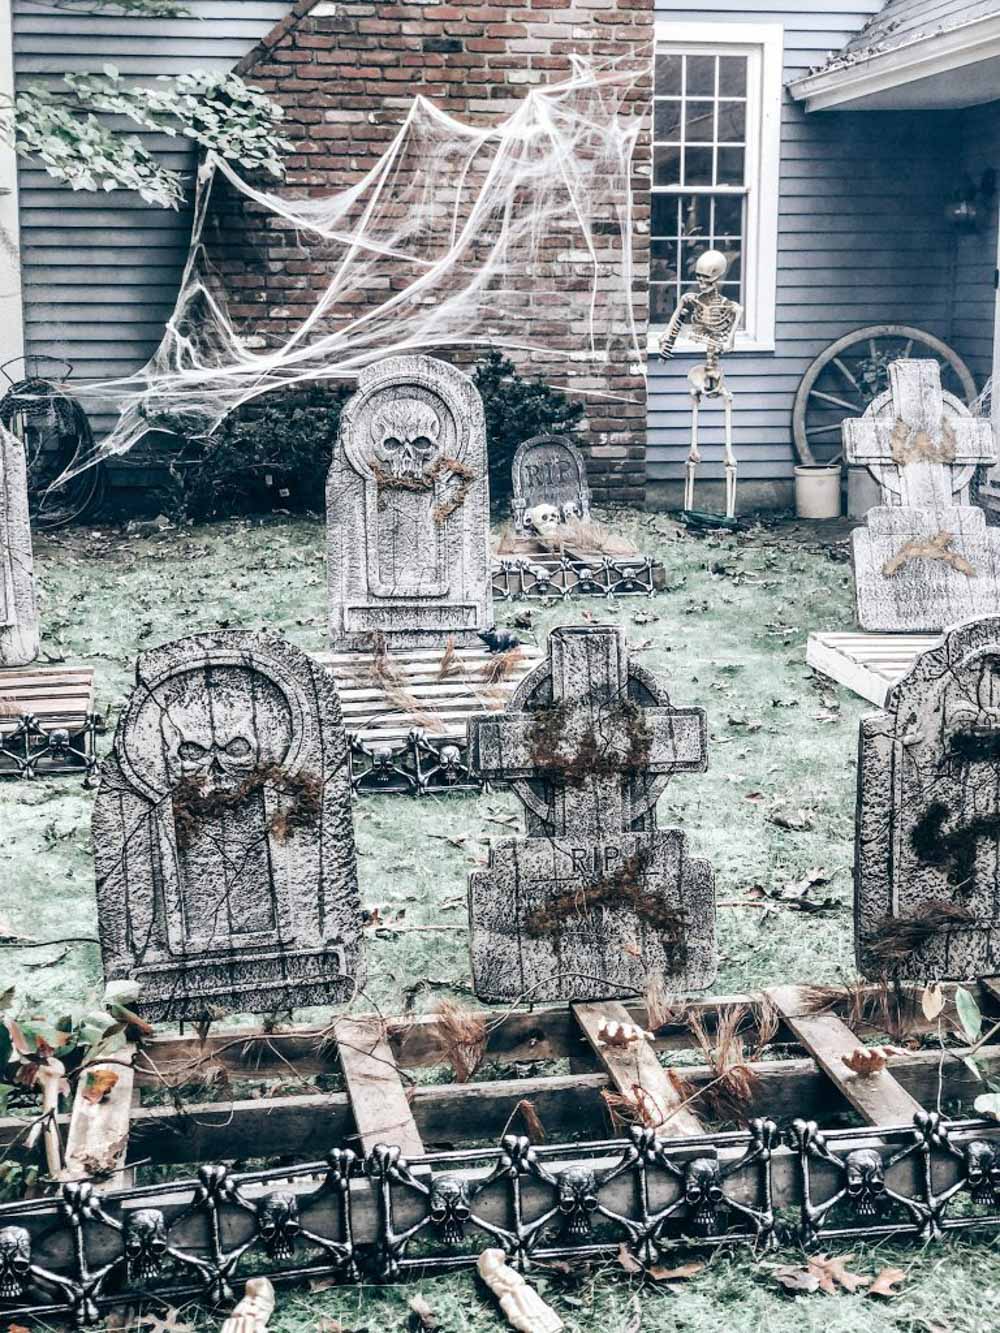 A cemetery filled with tombstones and spider webs.